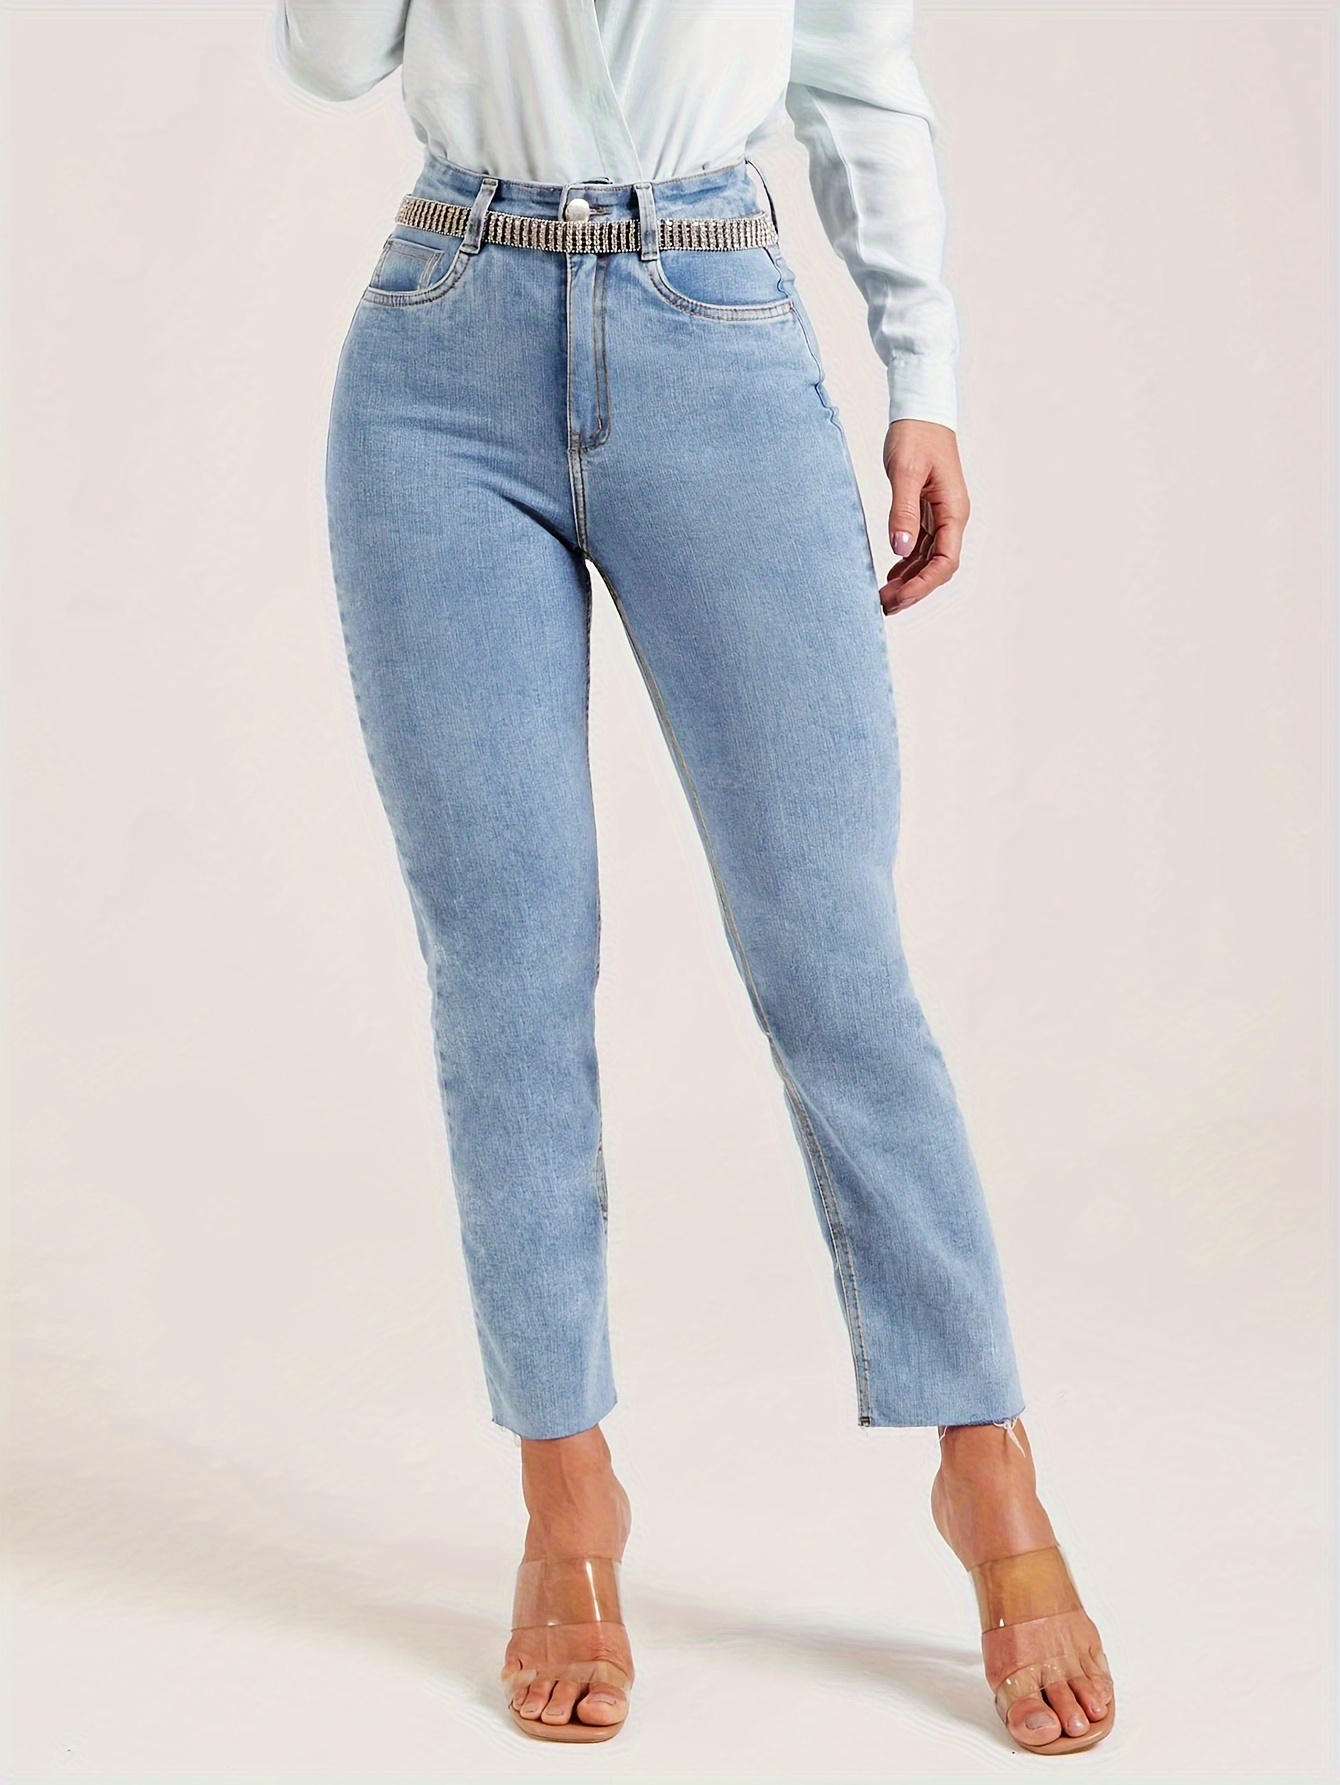 Blue High Waist Cropped Denim Jeans, Loose Fit Straight Legs Washed Baggy  Jeans, Women's Denim Jeans & Clothing